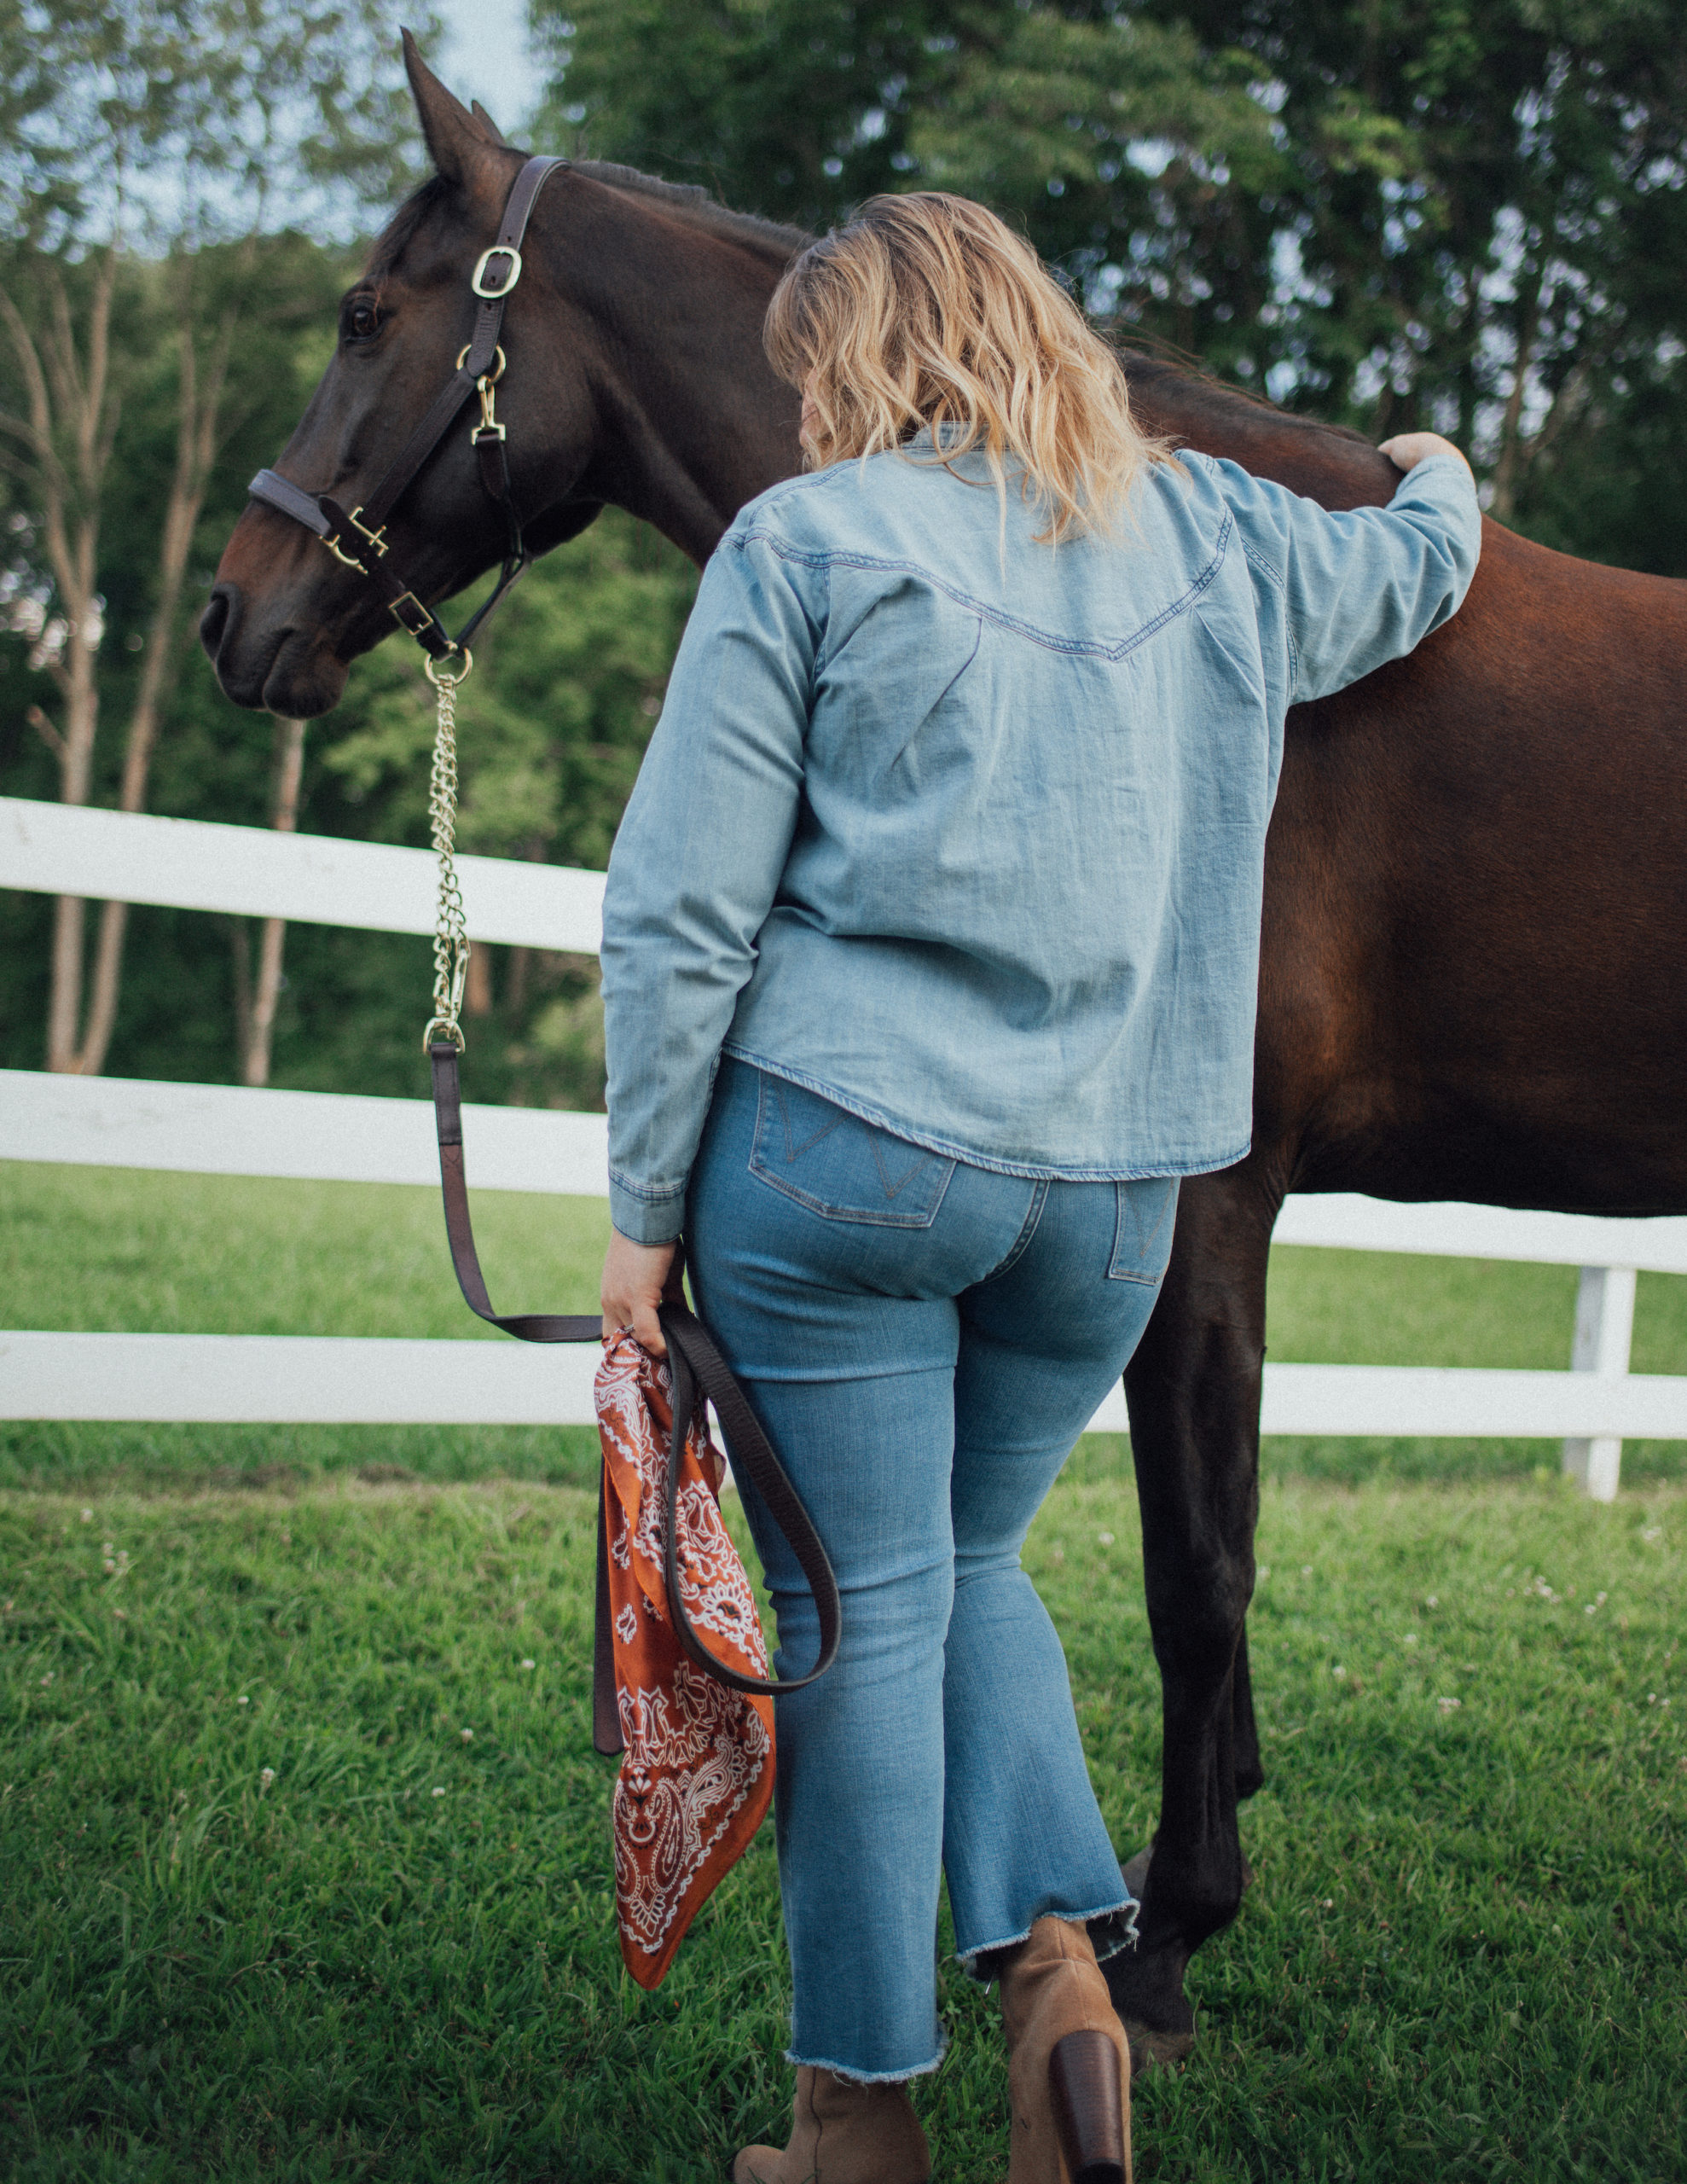 Plus size denim by Wrangler part of the new lady Wrangler collection! Sharing some special photos of my horses and some FAB jeans! 